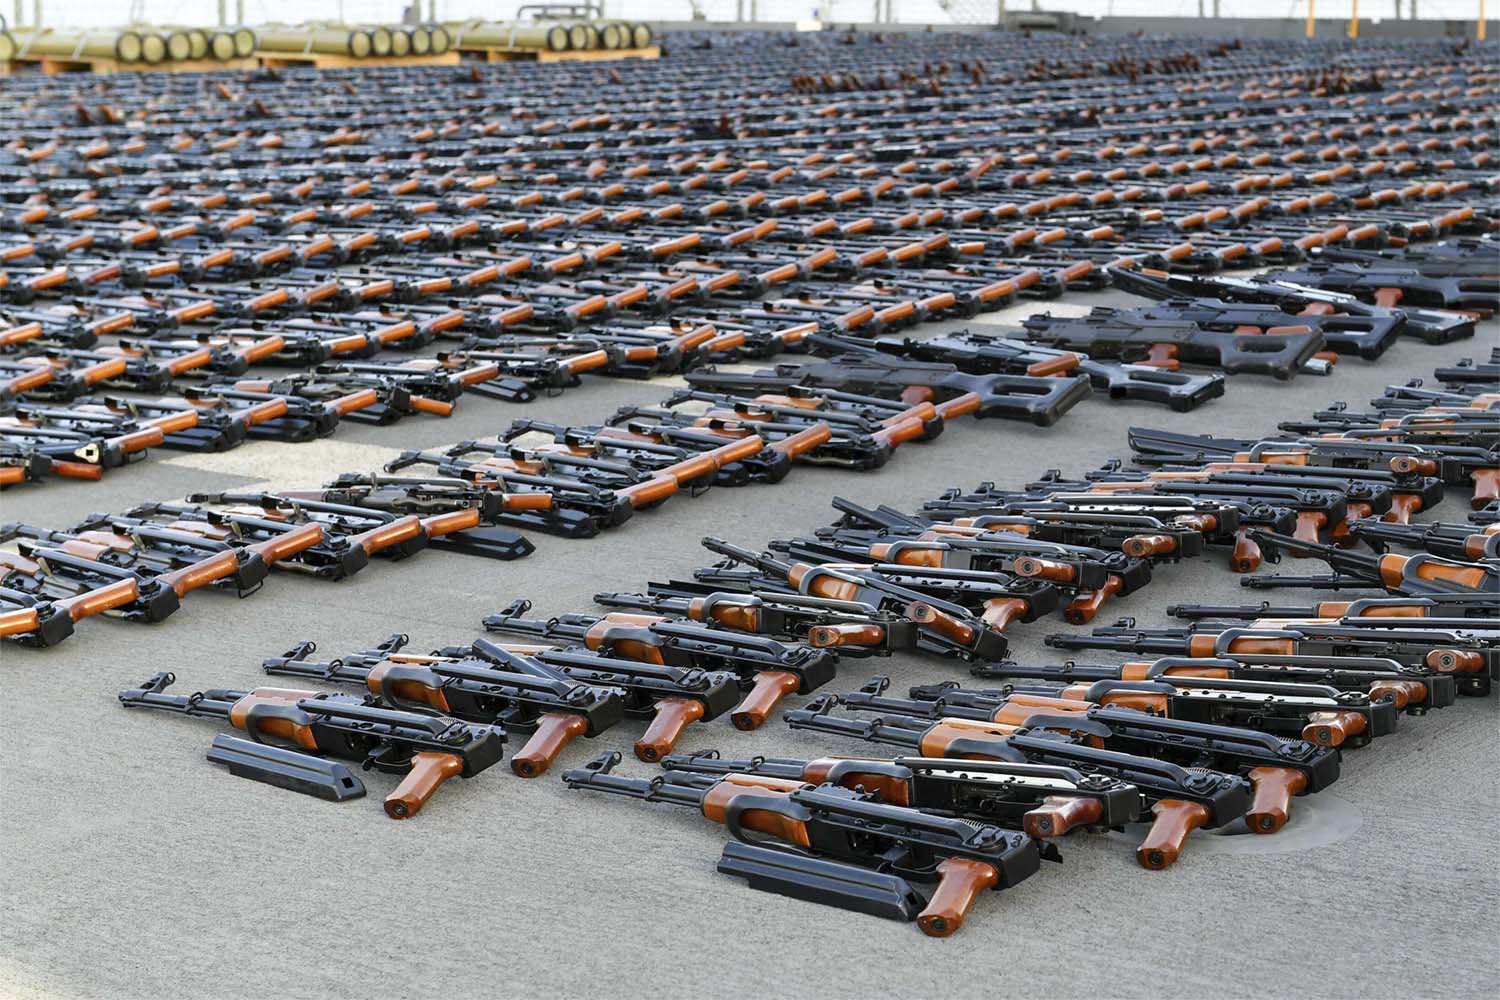 The weapons seizure occurred January 15 in the Gulf of Oman